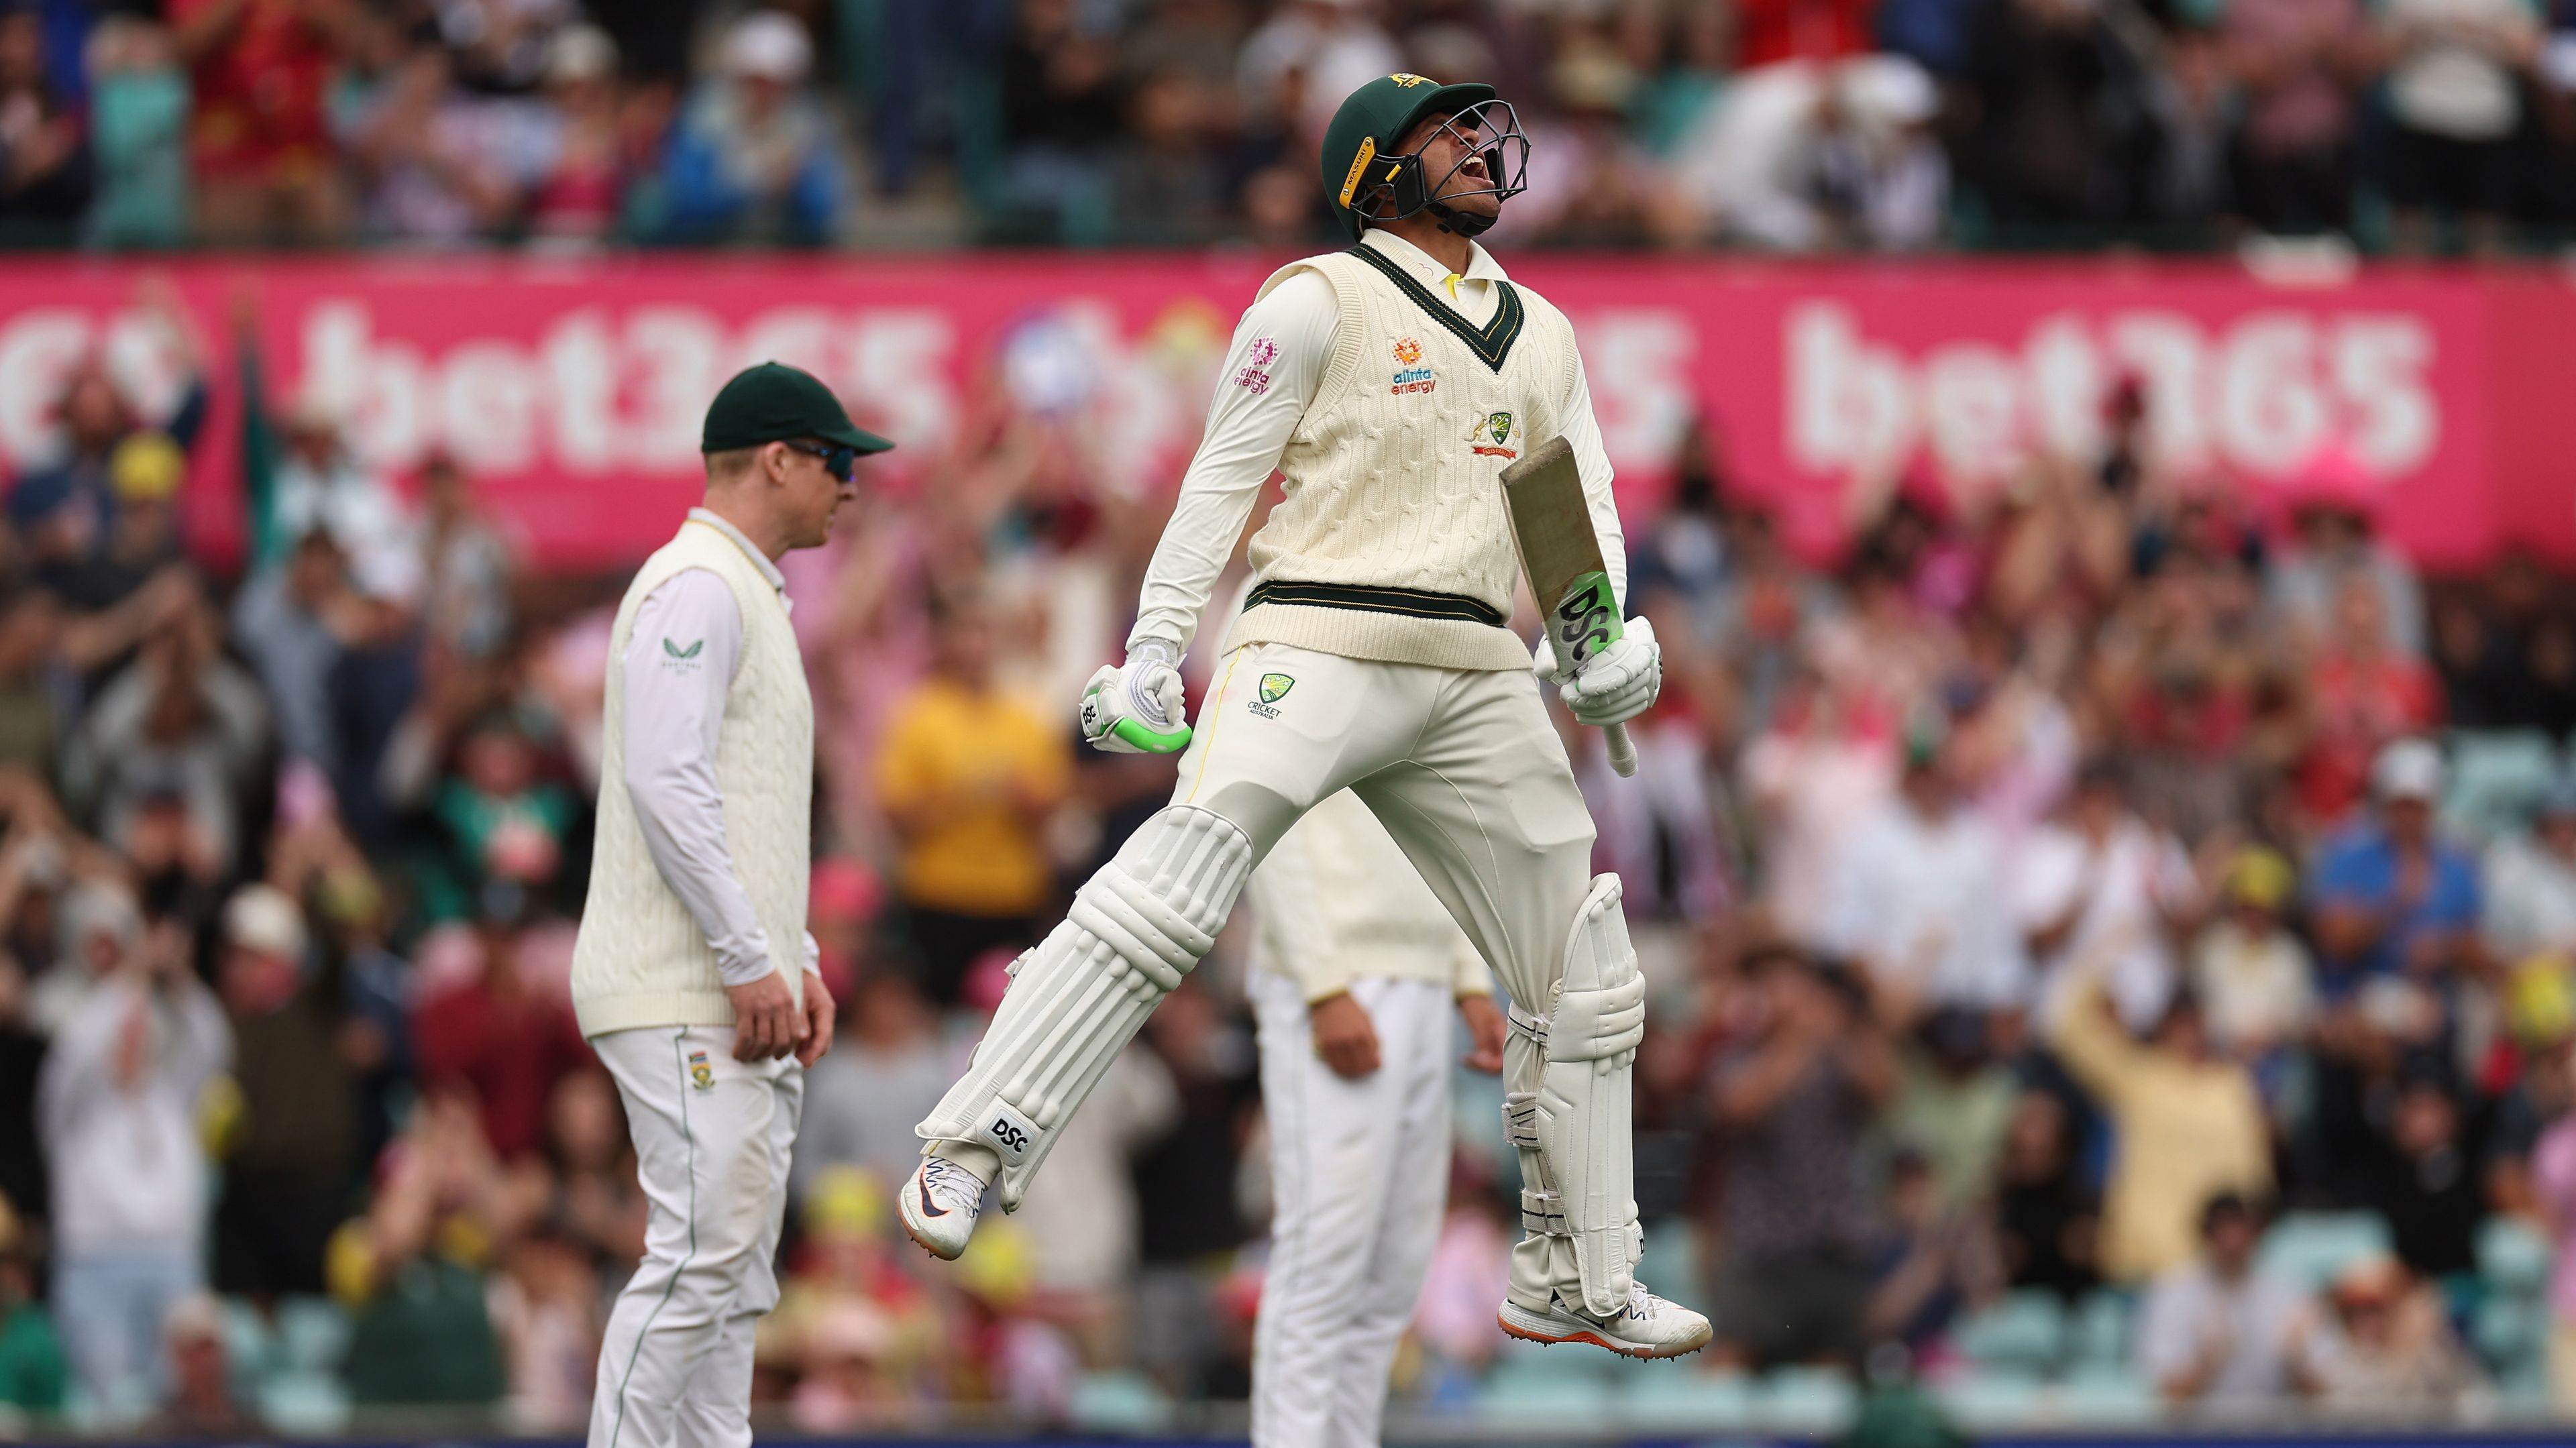  Usman Khawaja of Australia celebrates his century during day two of the Second Test match in the series between Australia and South Africa at Sydney Cricket Ground on January 05, 2023 in Sydney, Australia. (Photo by Cameron Spencer/Getty Images)